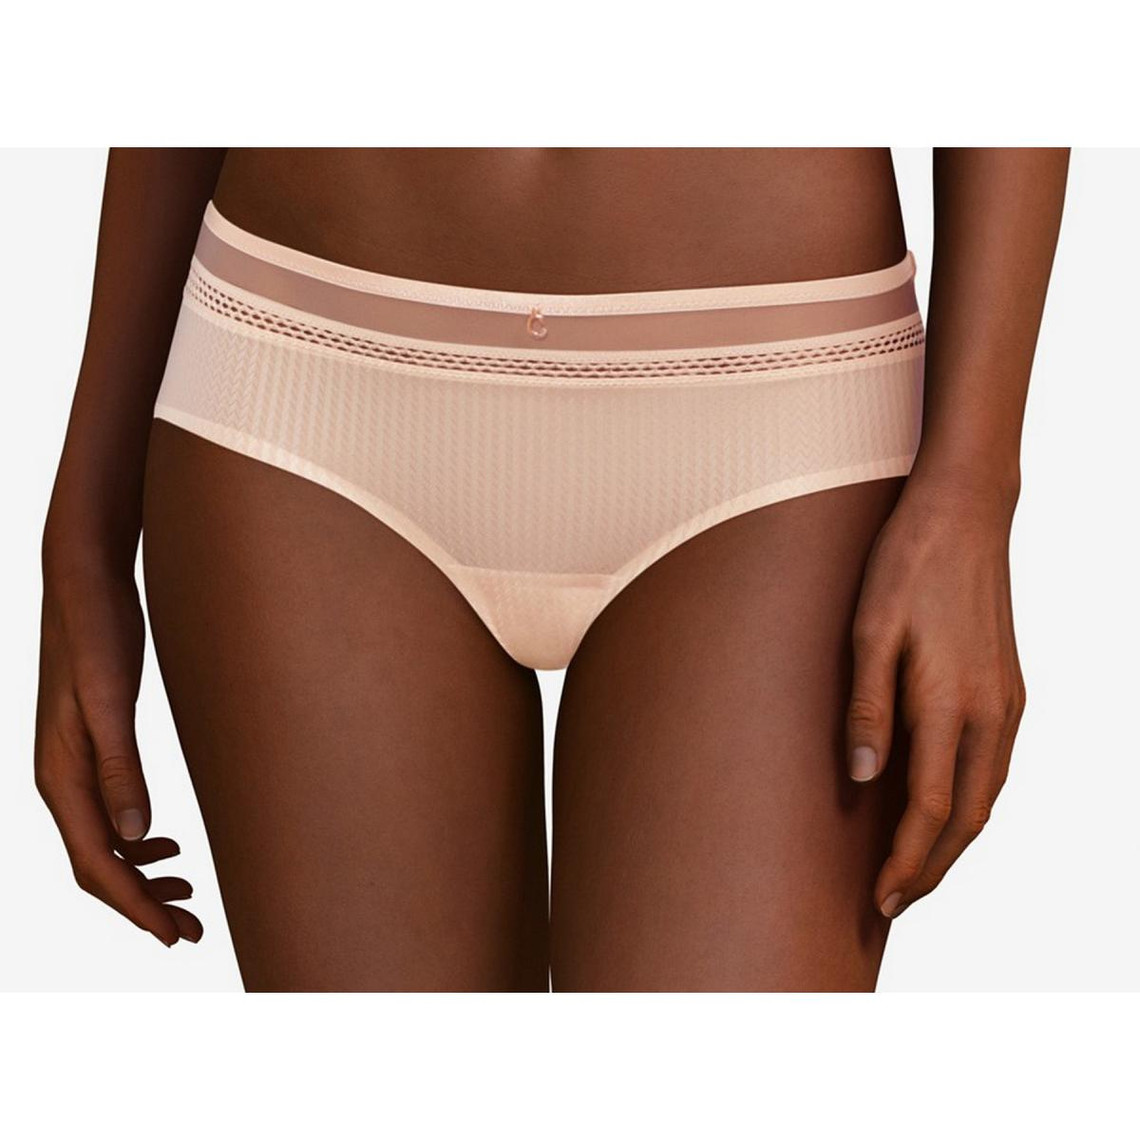 shorty chantelle chic essential rose